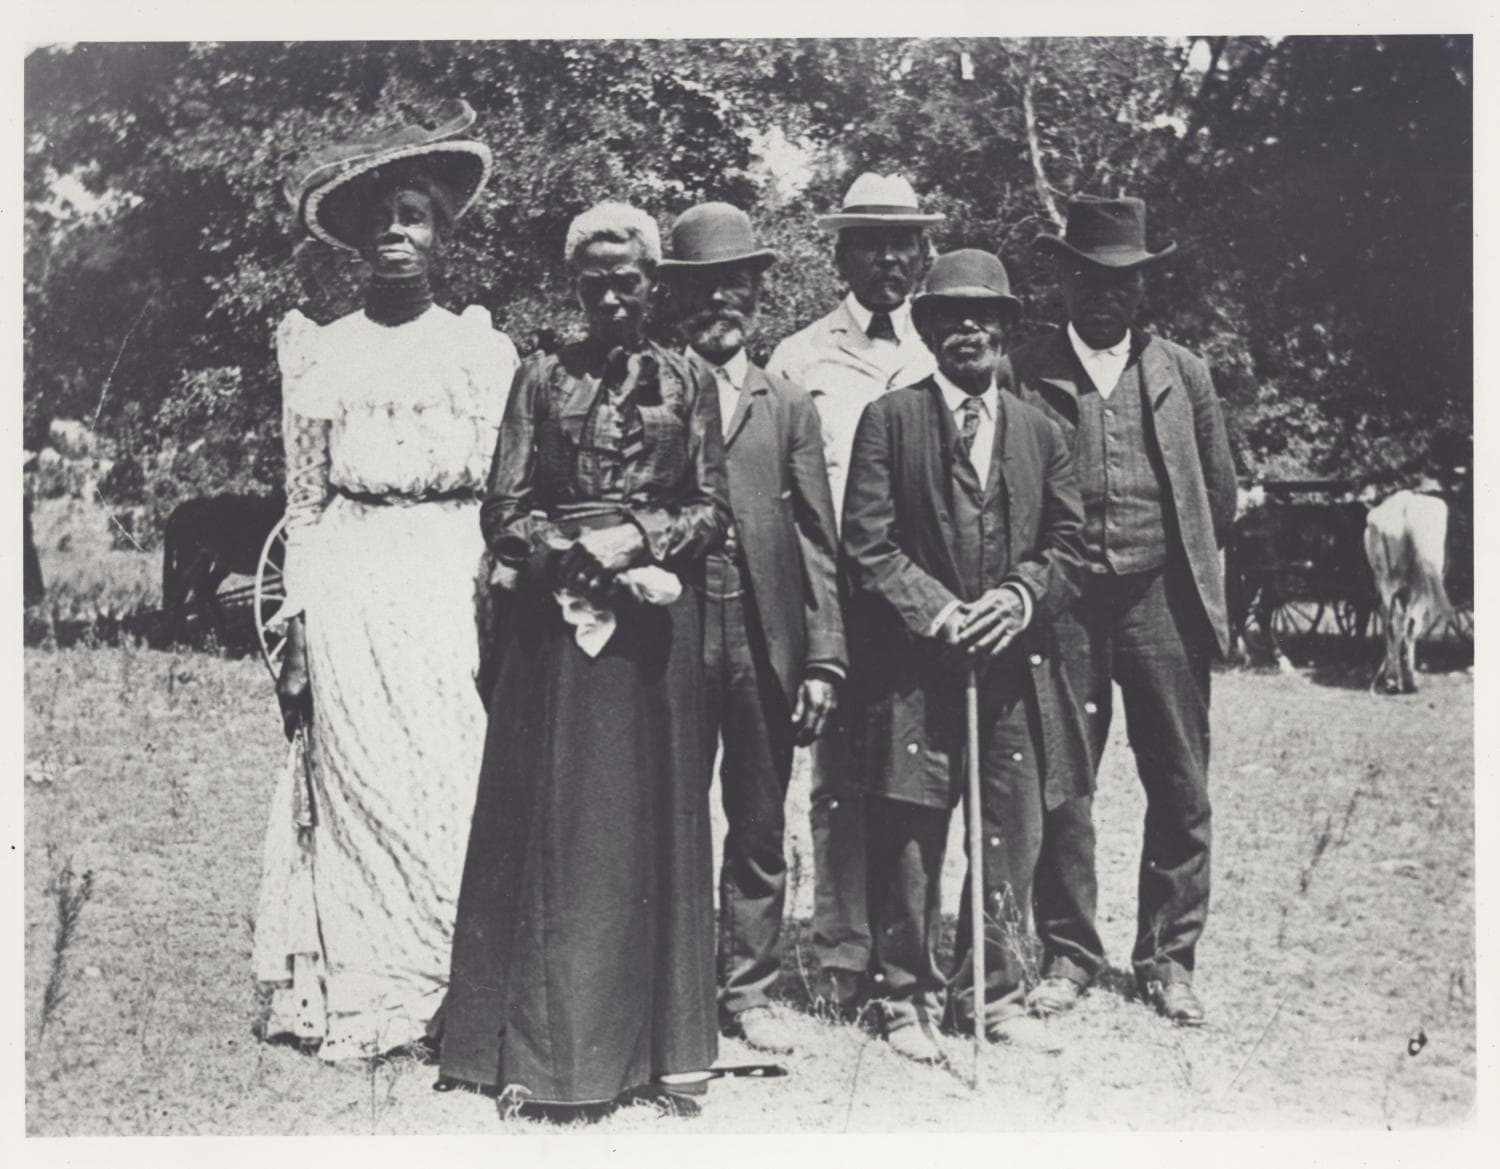 Historical image  of a group of African Americans at Juneteenth celebration in 1900.19